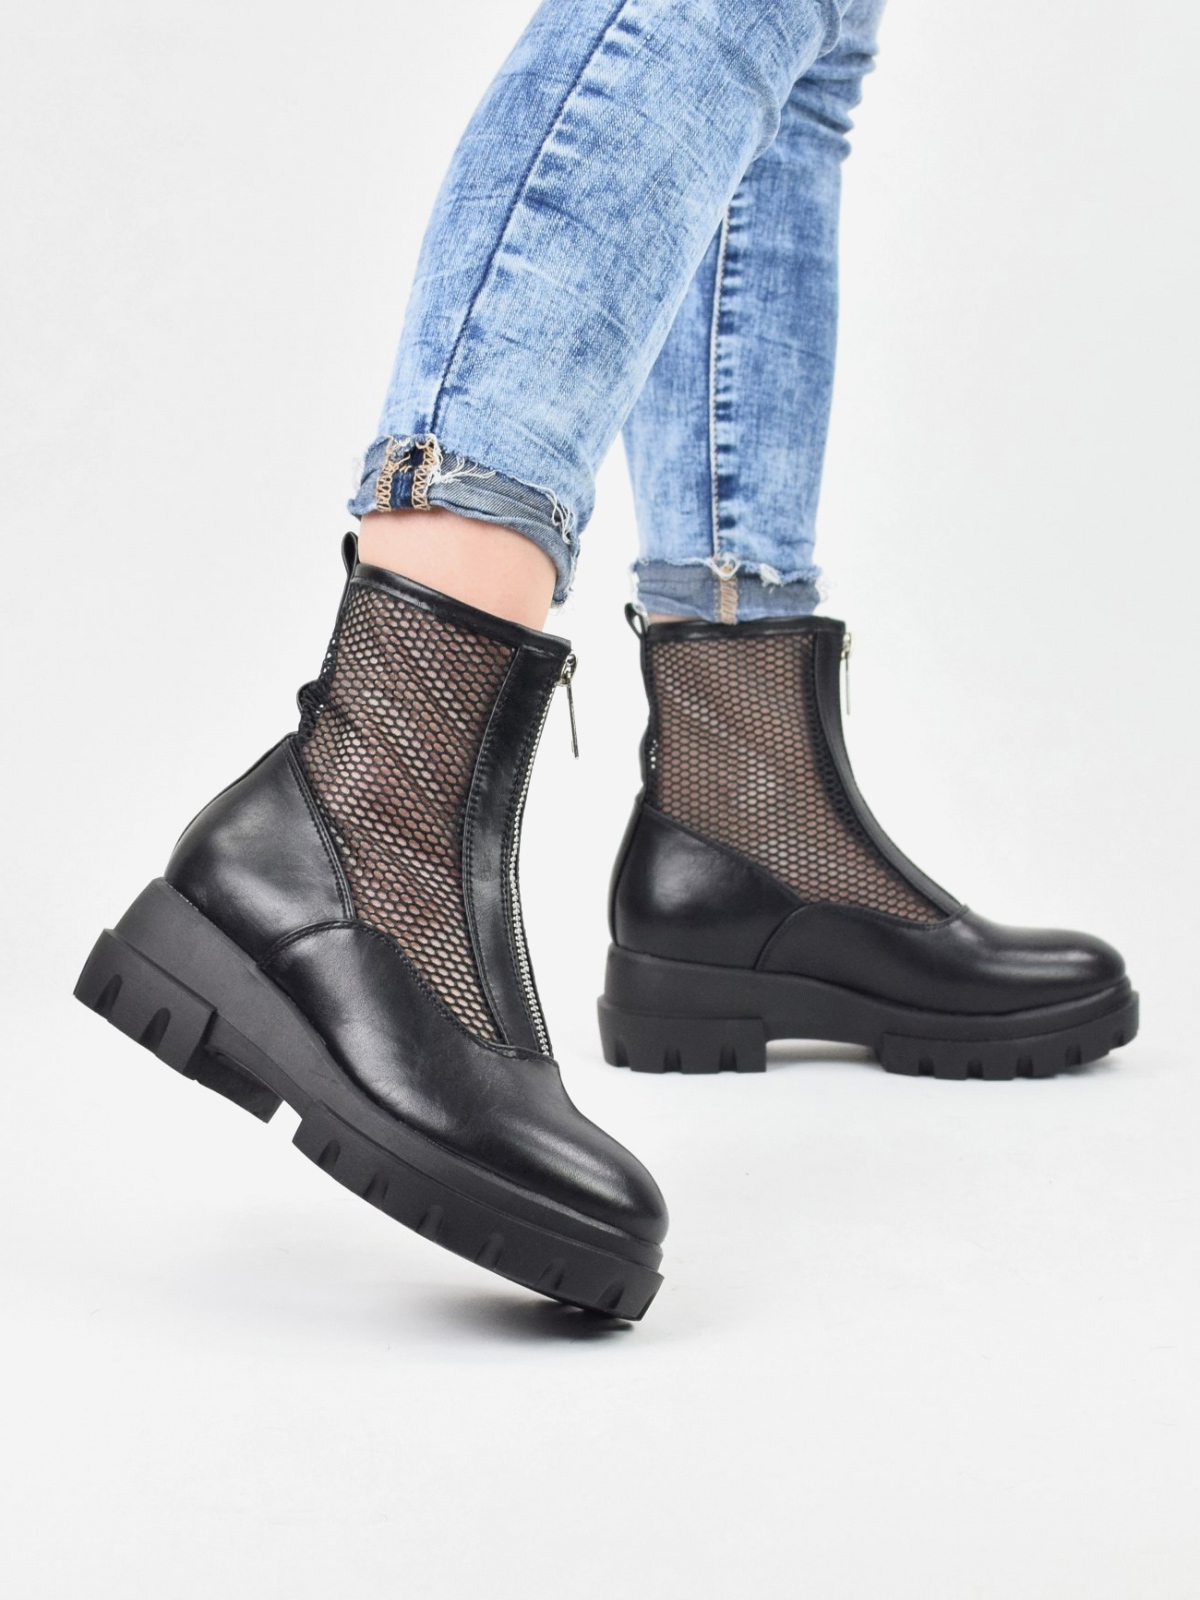 Women's ankle boots in black with mesh